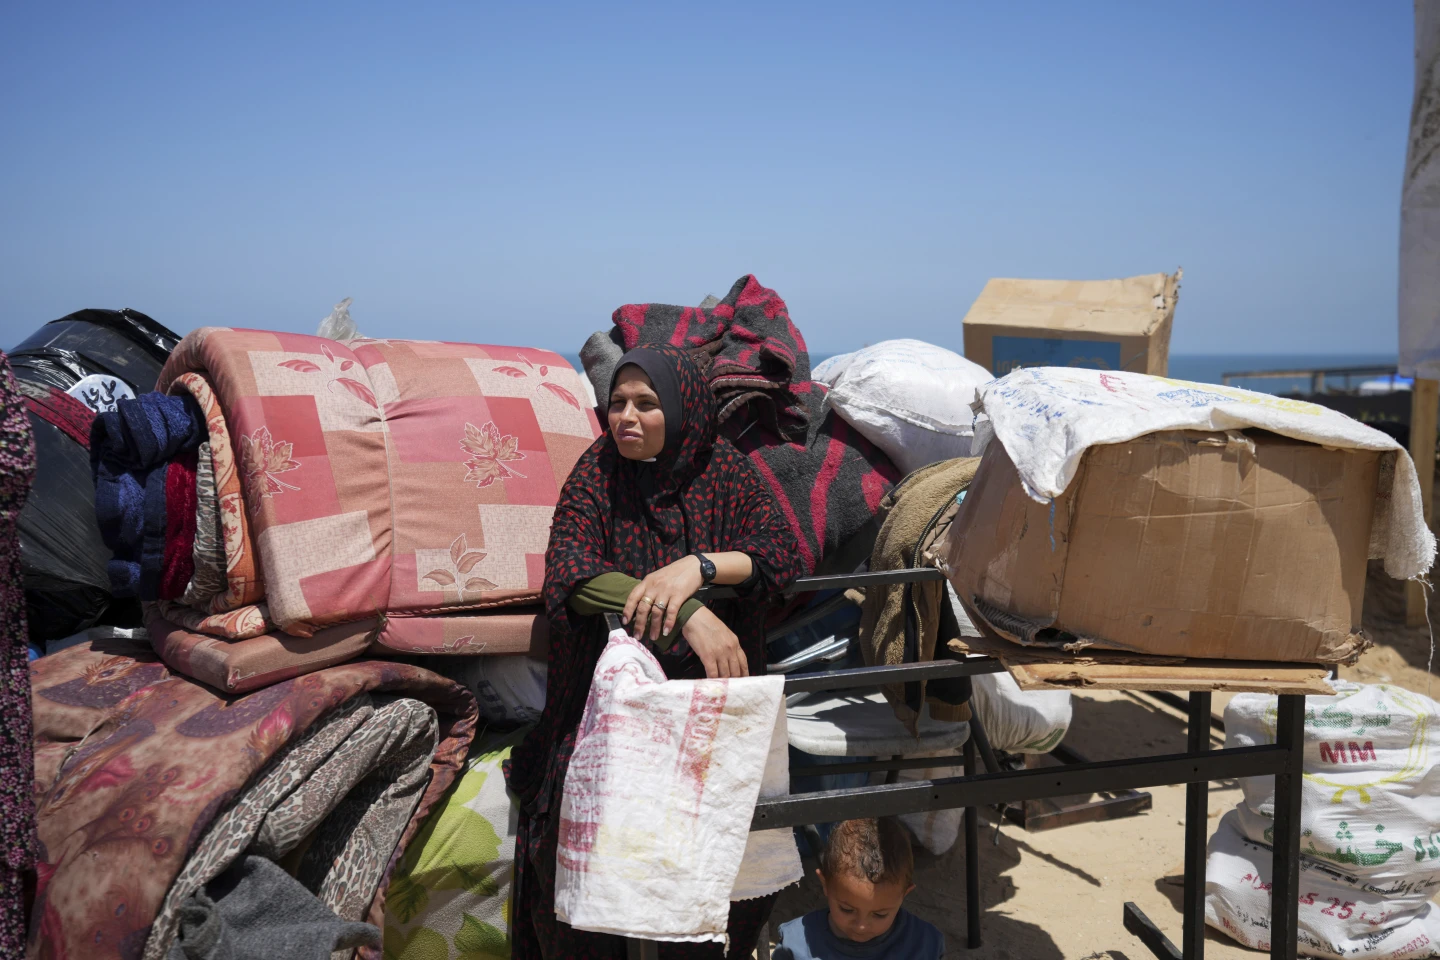 More than half a million people flee fighting in Rafah and northern Gaza, UN says